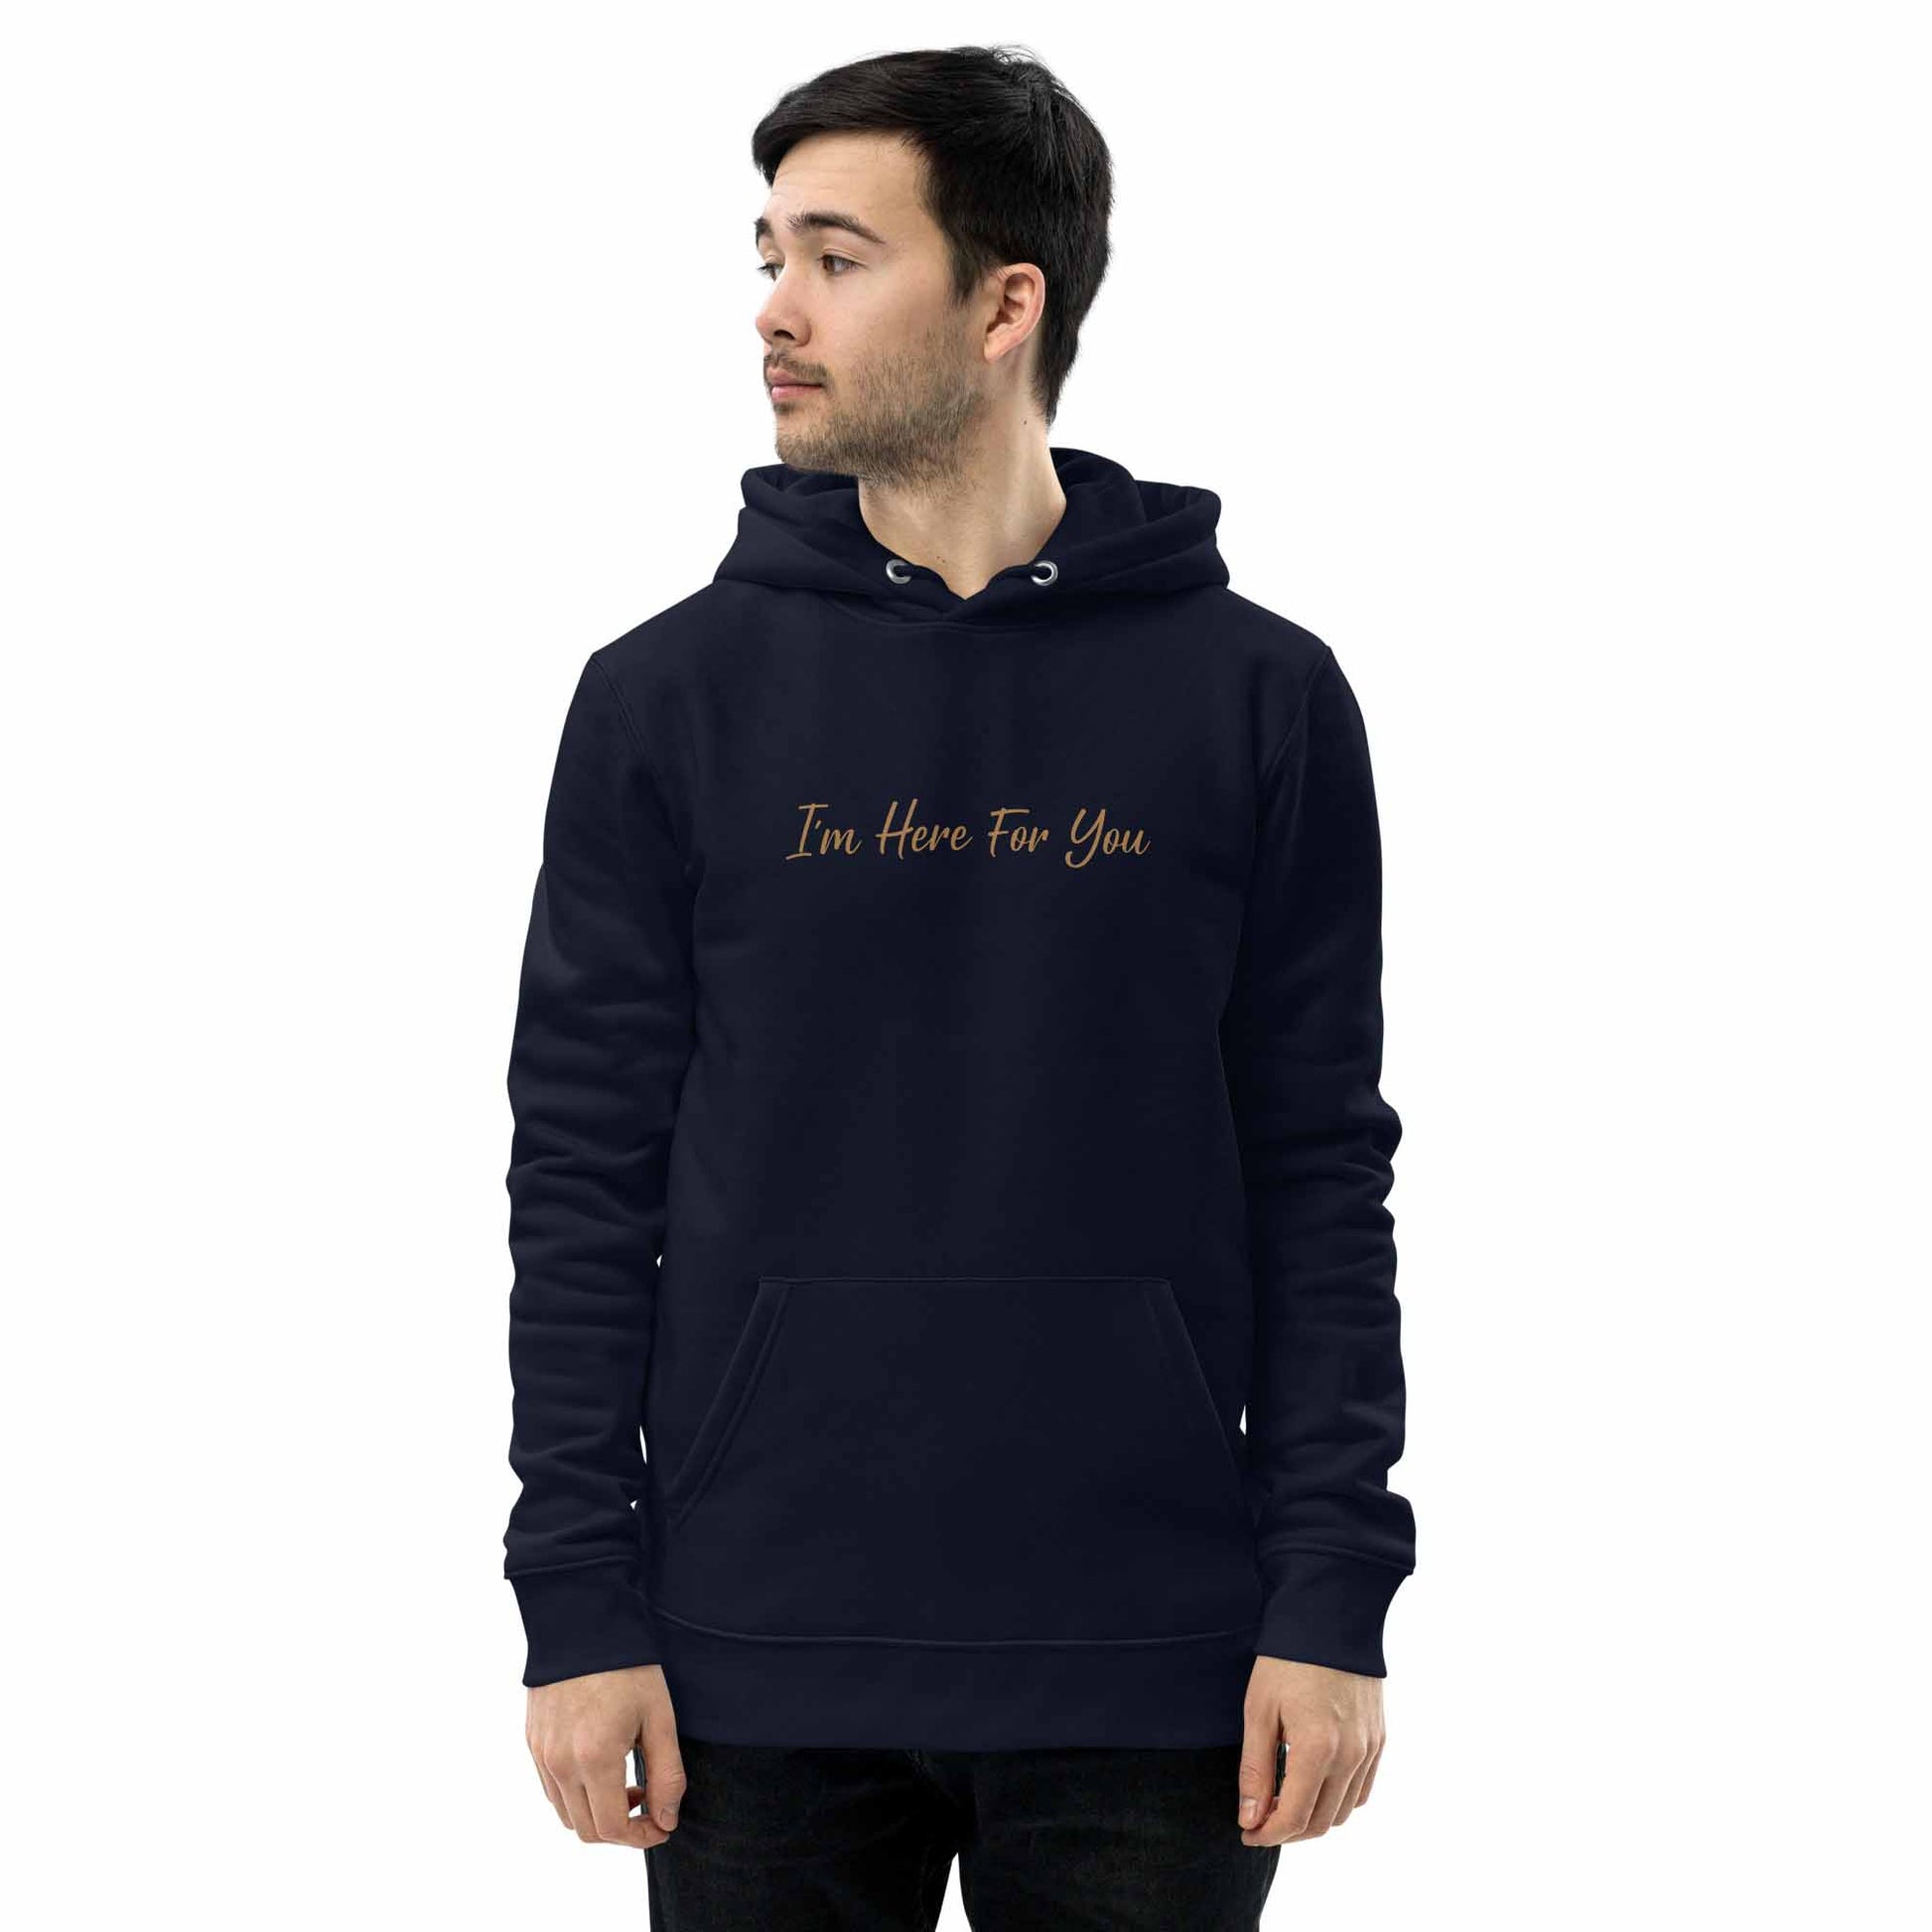 Men black positive hoodie with inspirational quote, "I'm Here For You."